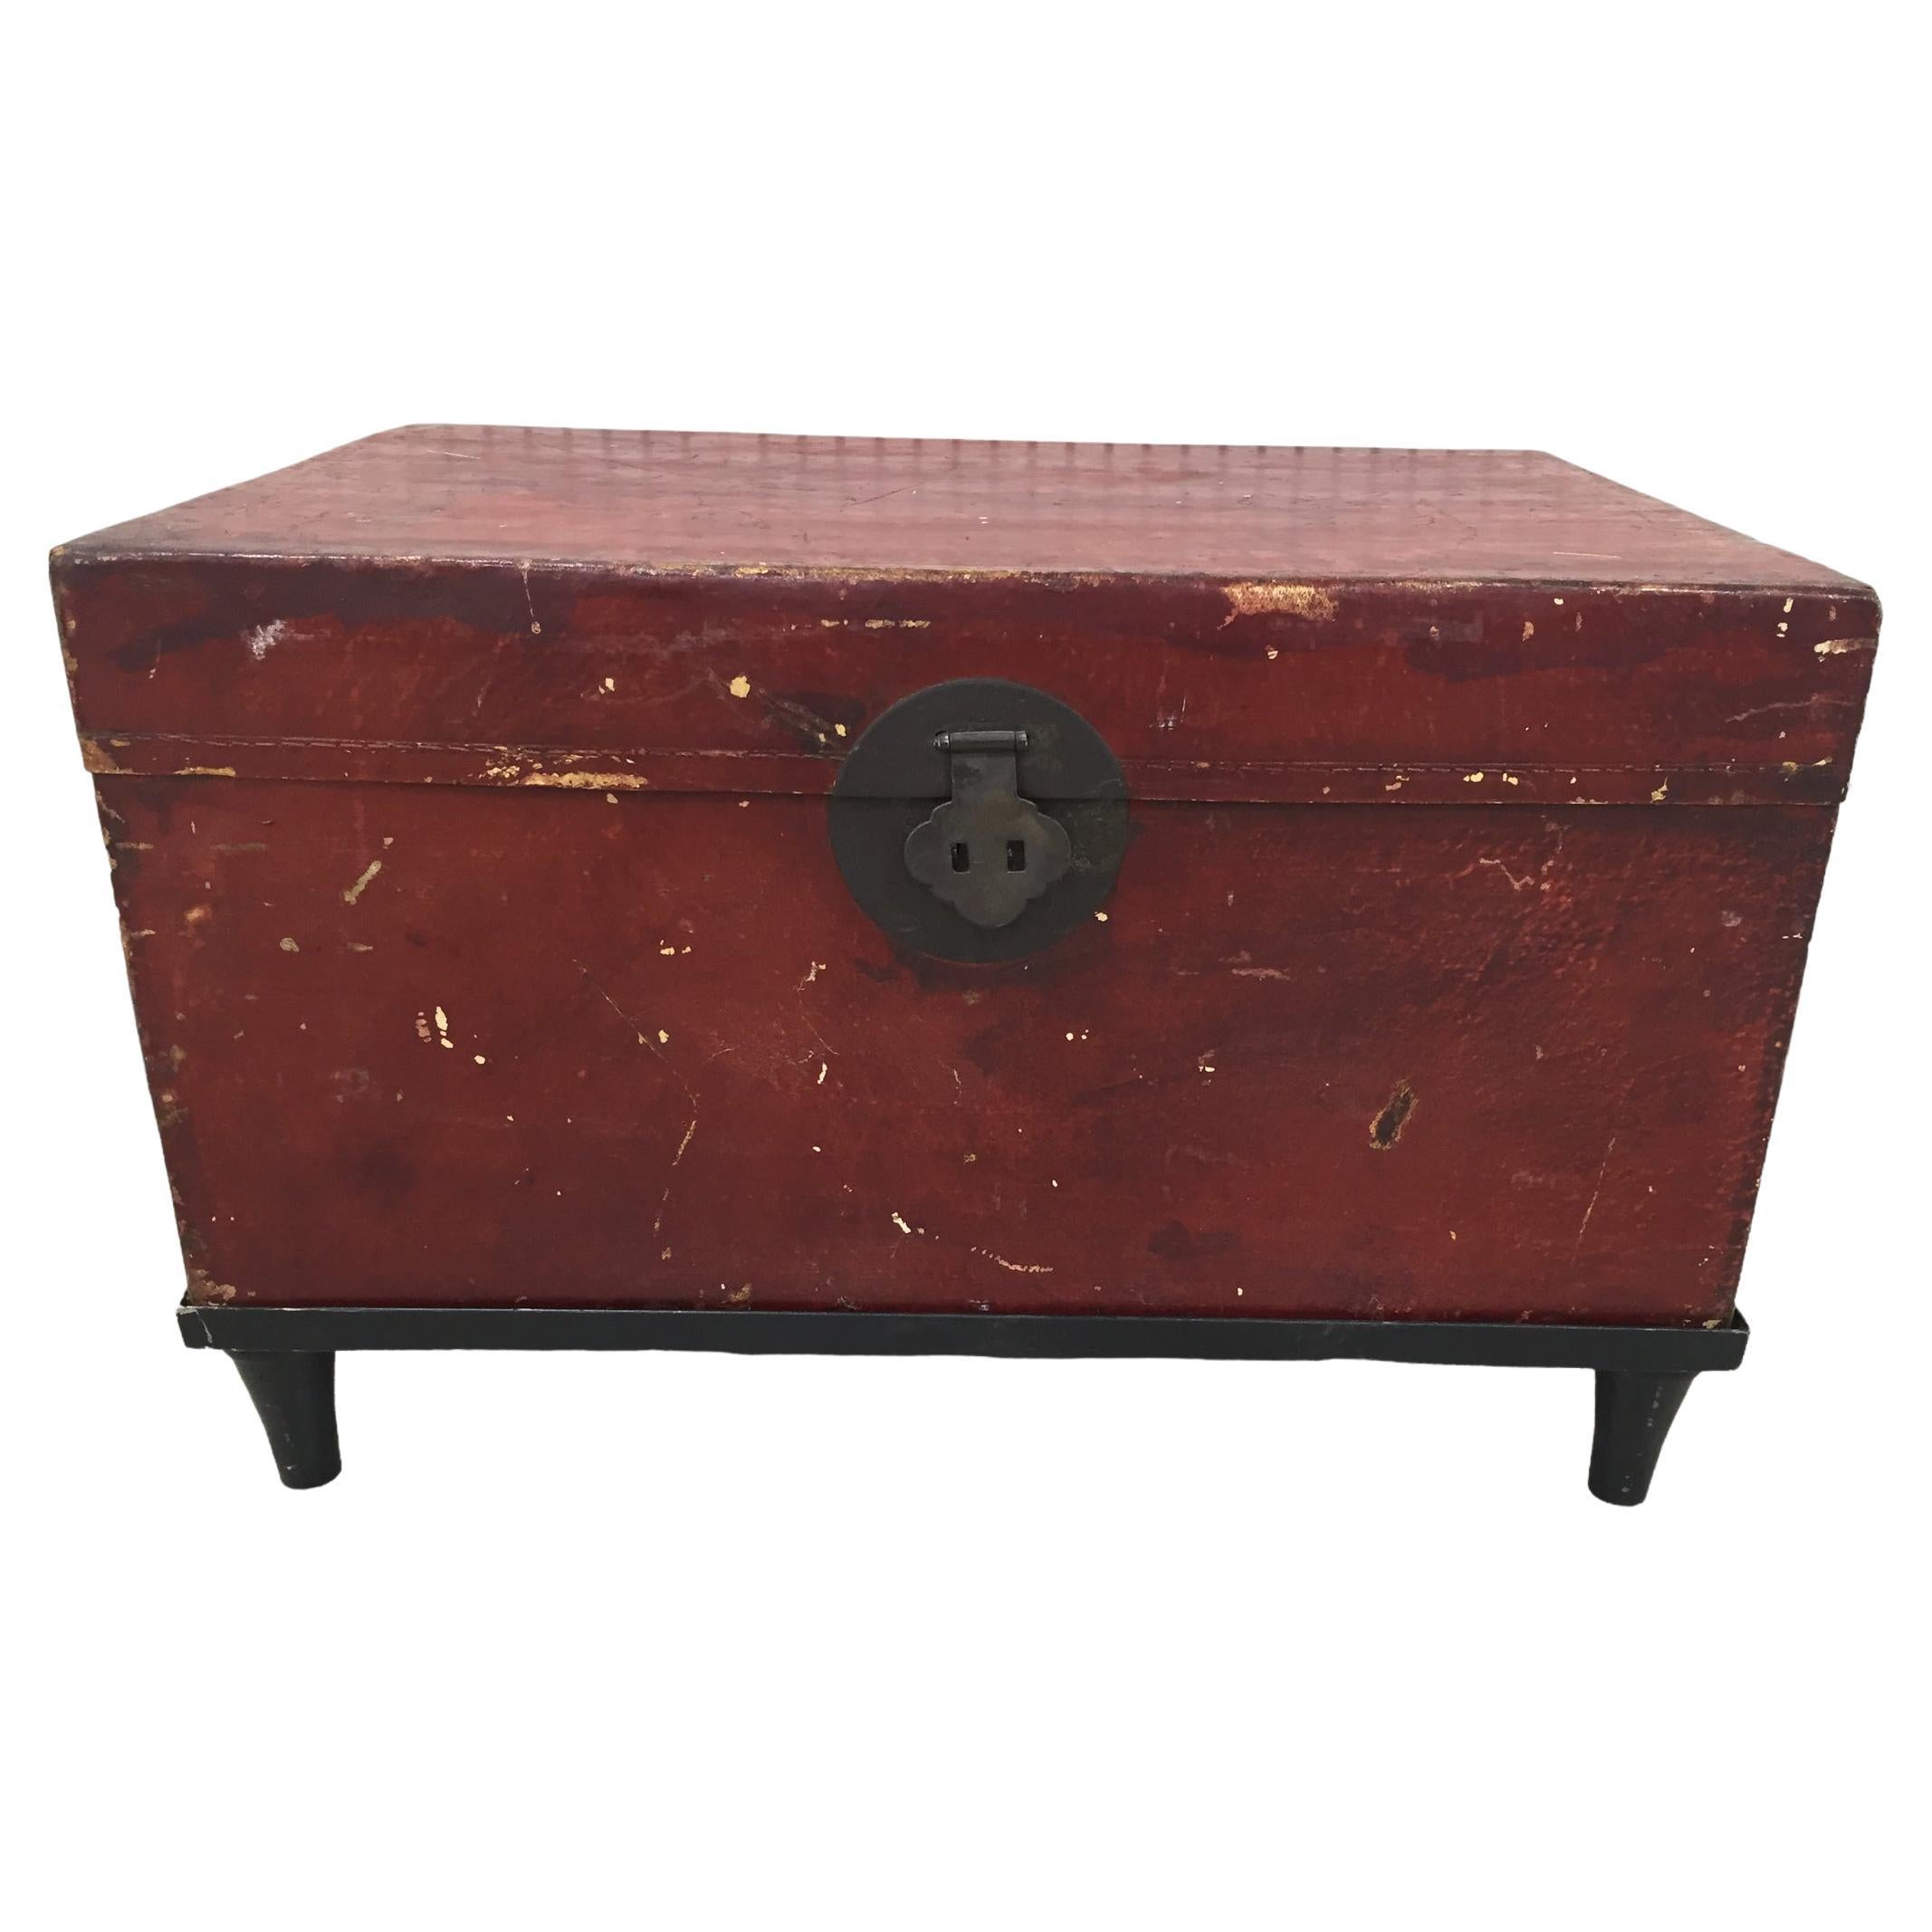 Antique Chinese Red Leather Trunk on Stand For Sale